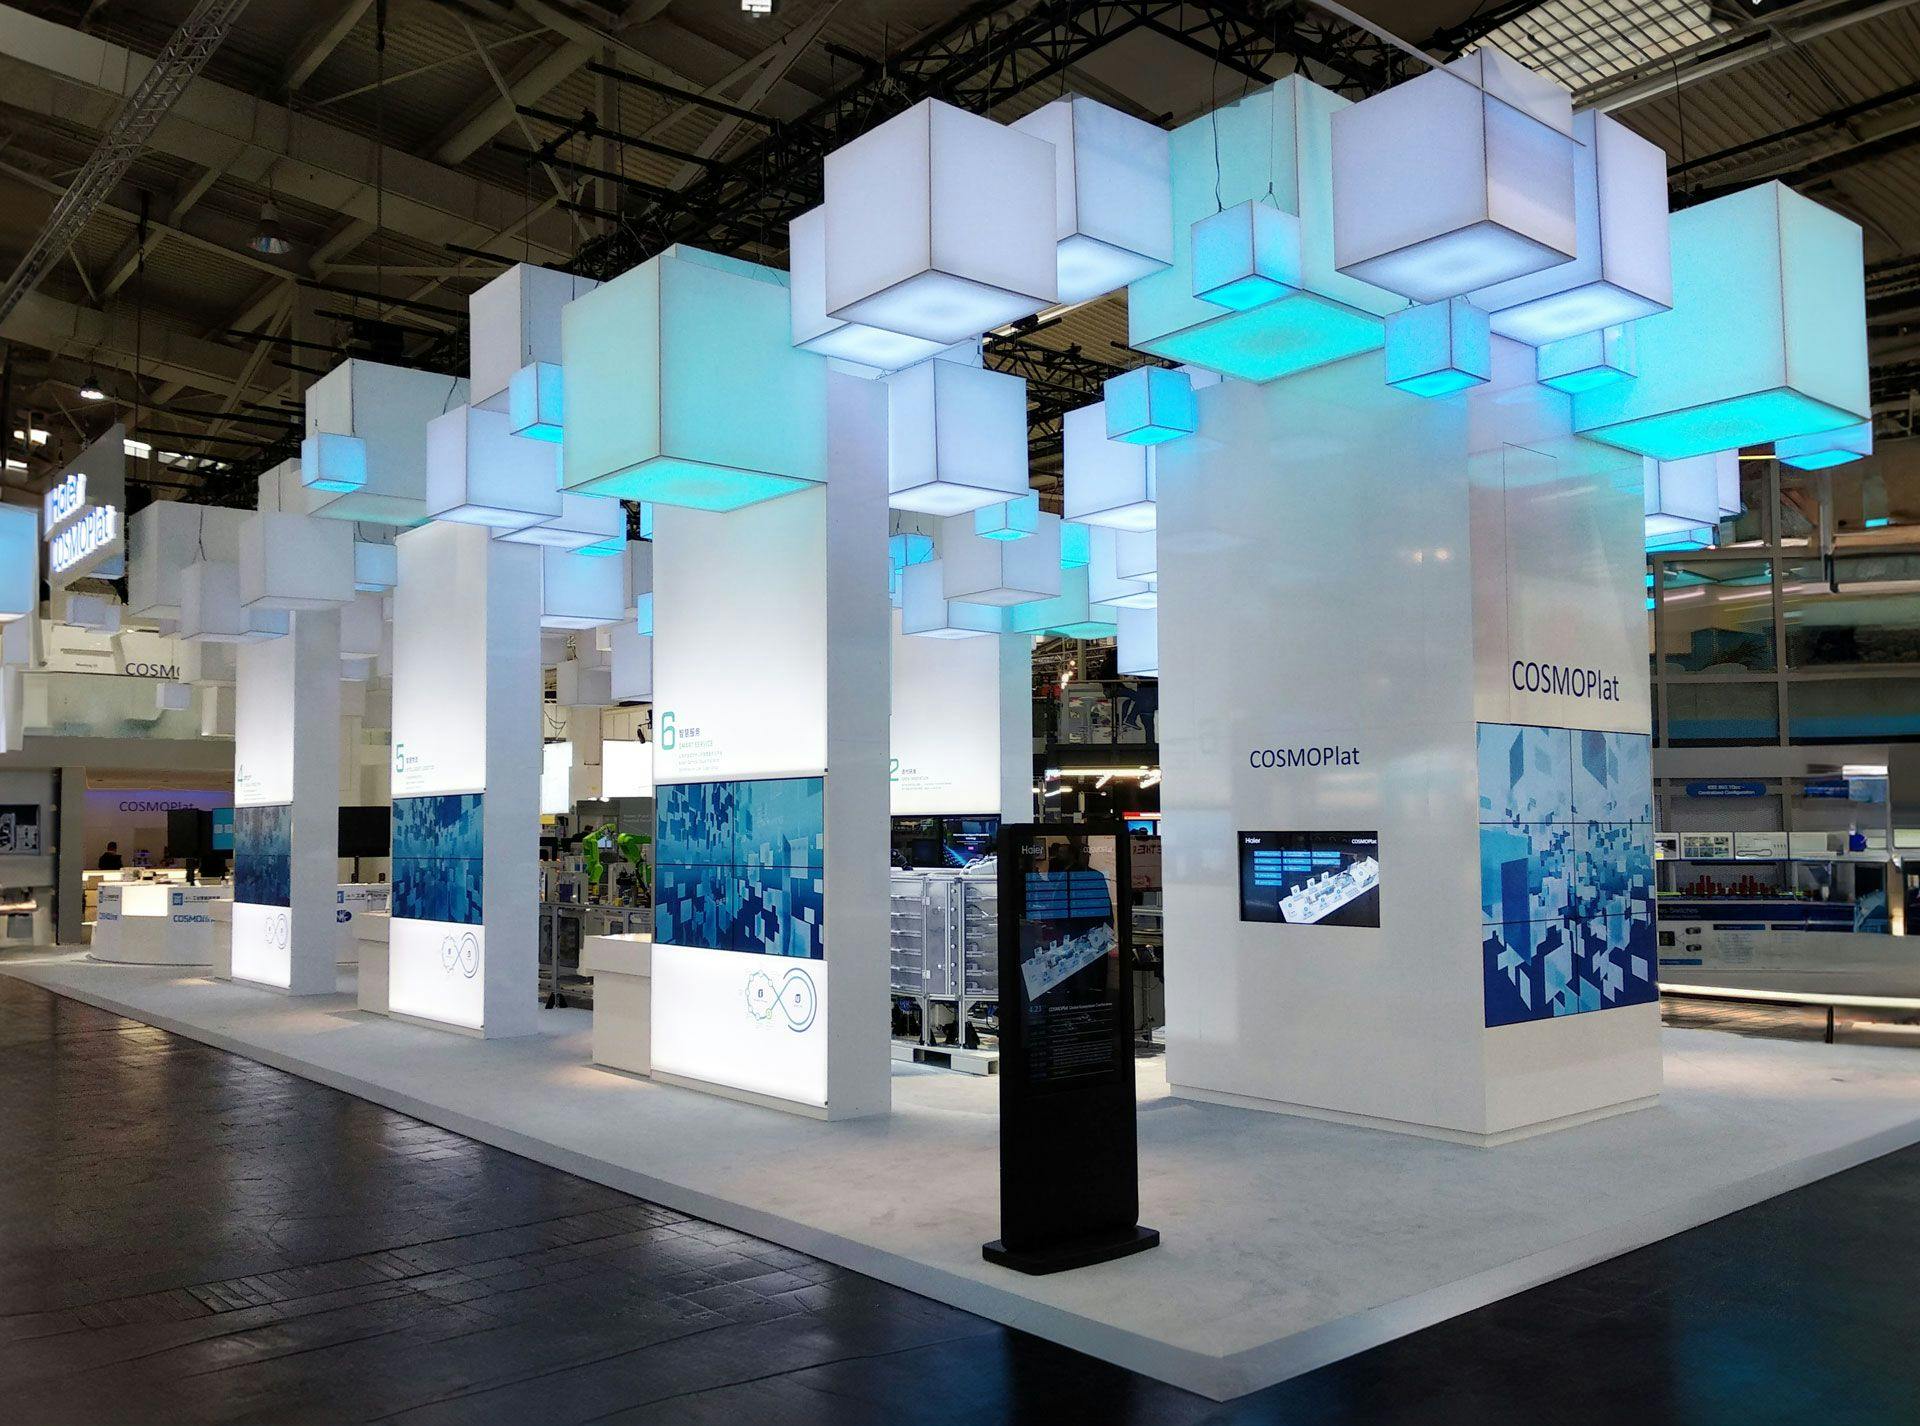 Exhibition stand with illuminated cubes